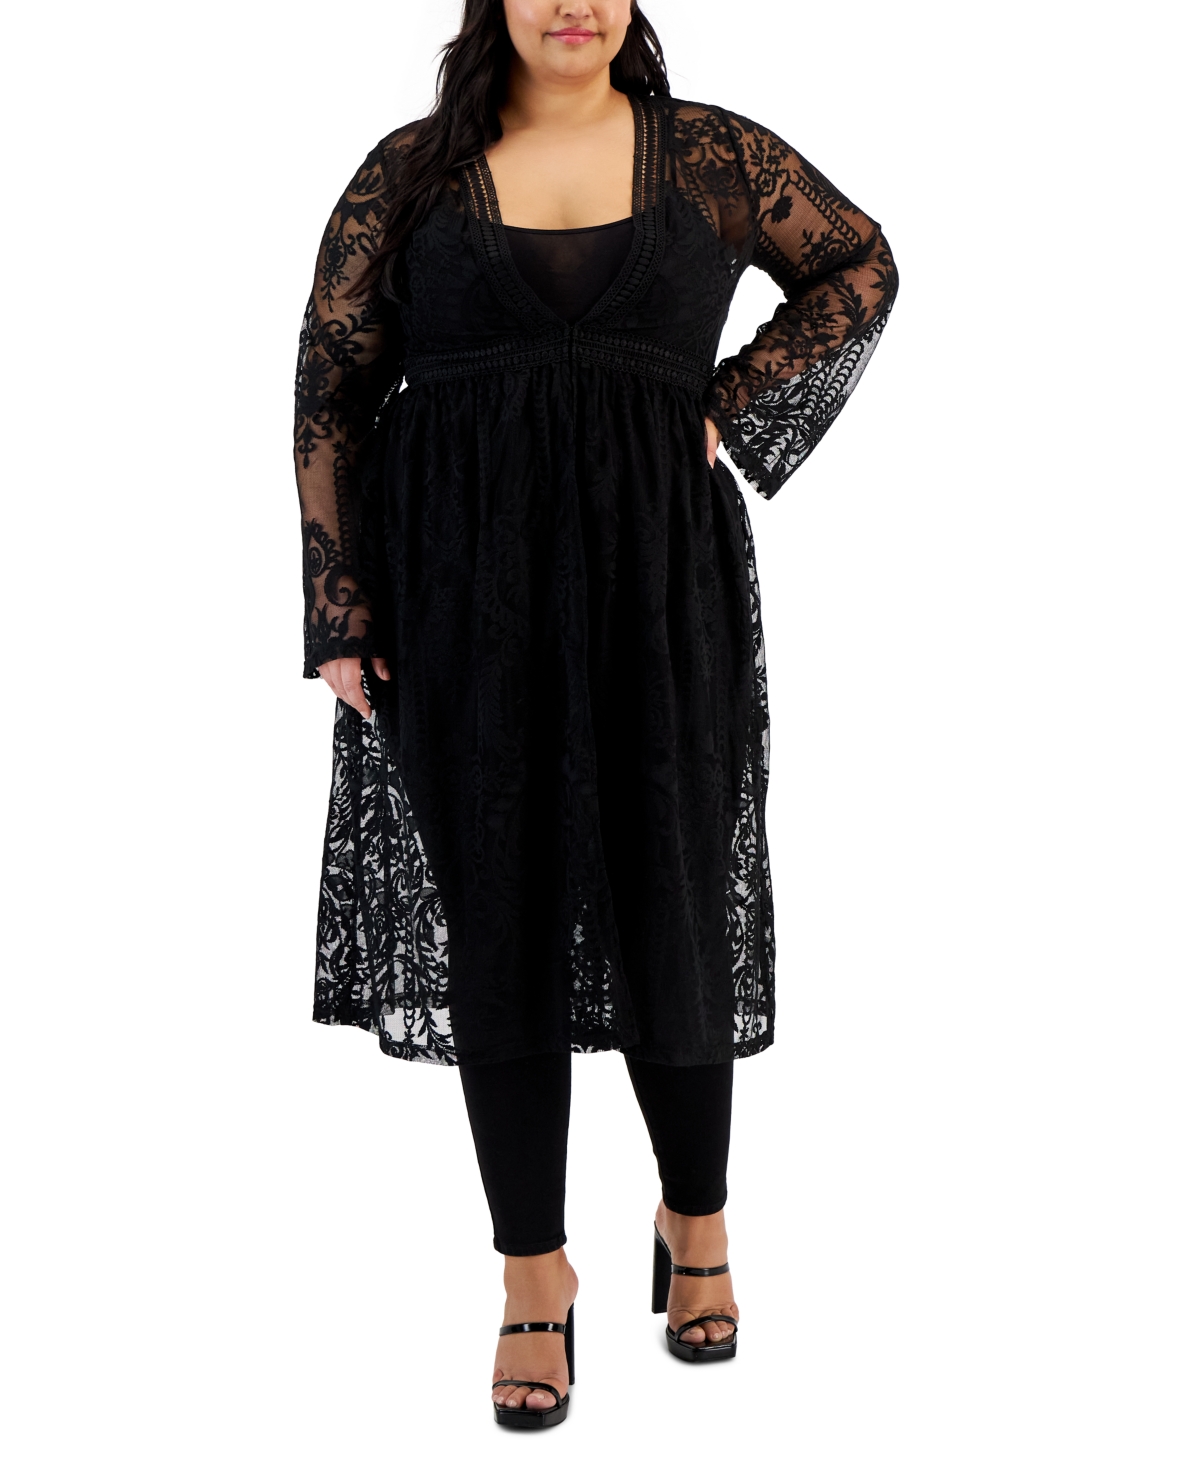 Full Circle Trends Trendy Plus Size Lace Longline Duster